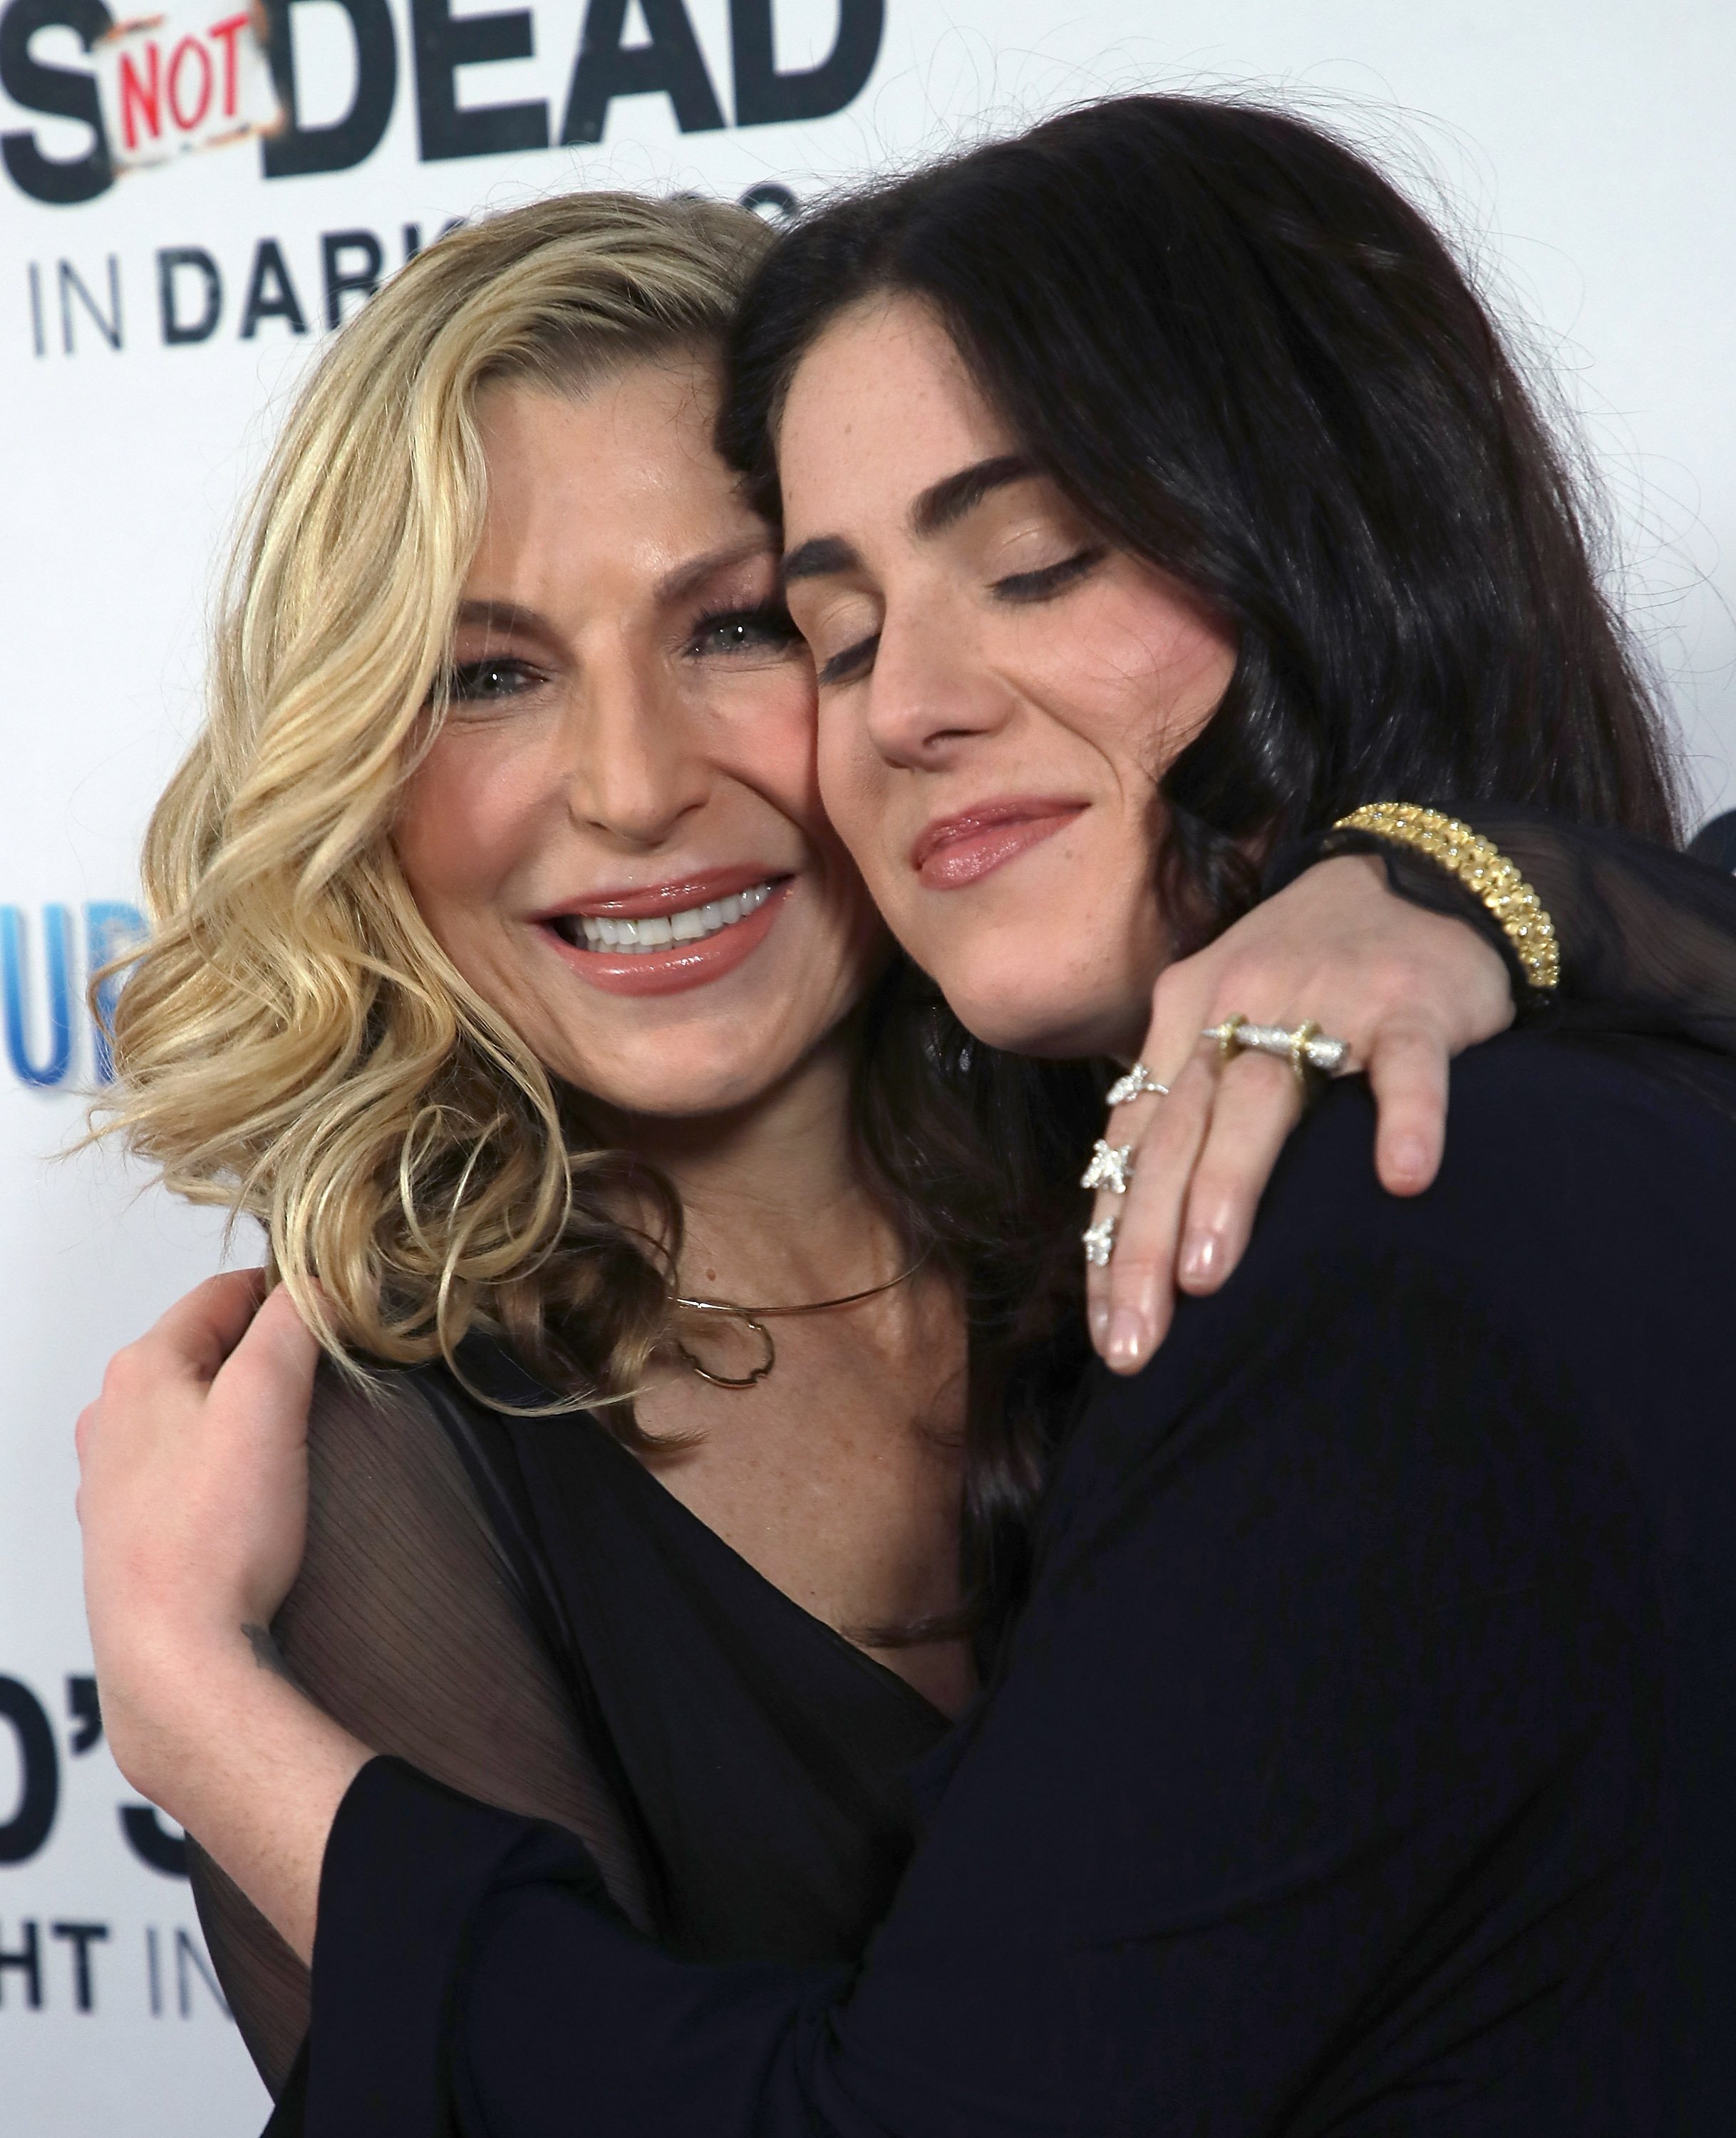 Tatum O'Neal and daughter Emily McEnroe attend the "God's Not Dead: A Light in Darkness" premiere at Egyptian Theatre on March 20, 2018 in Hollywood, California. | Photo: GettyImages